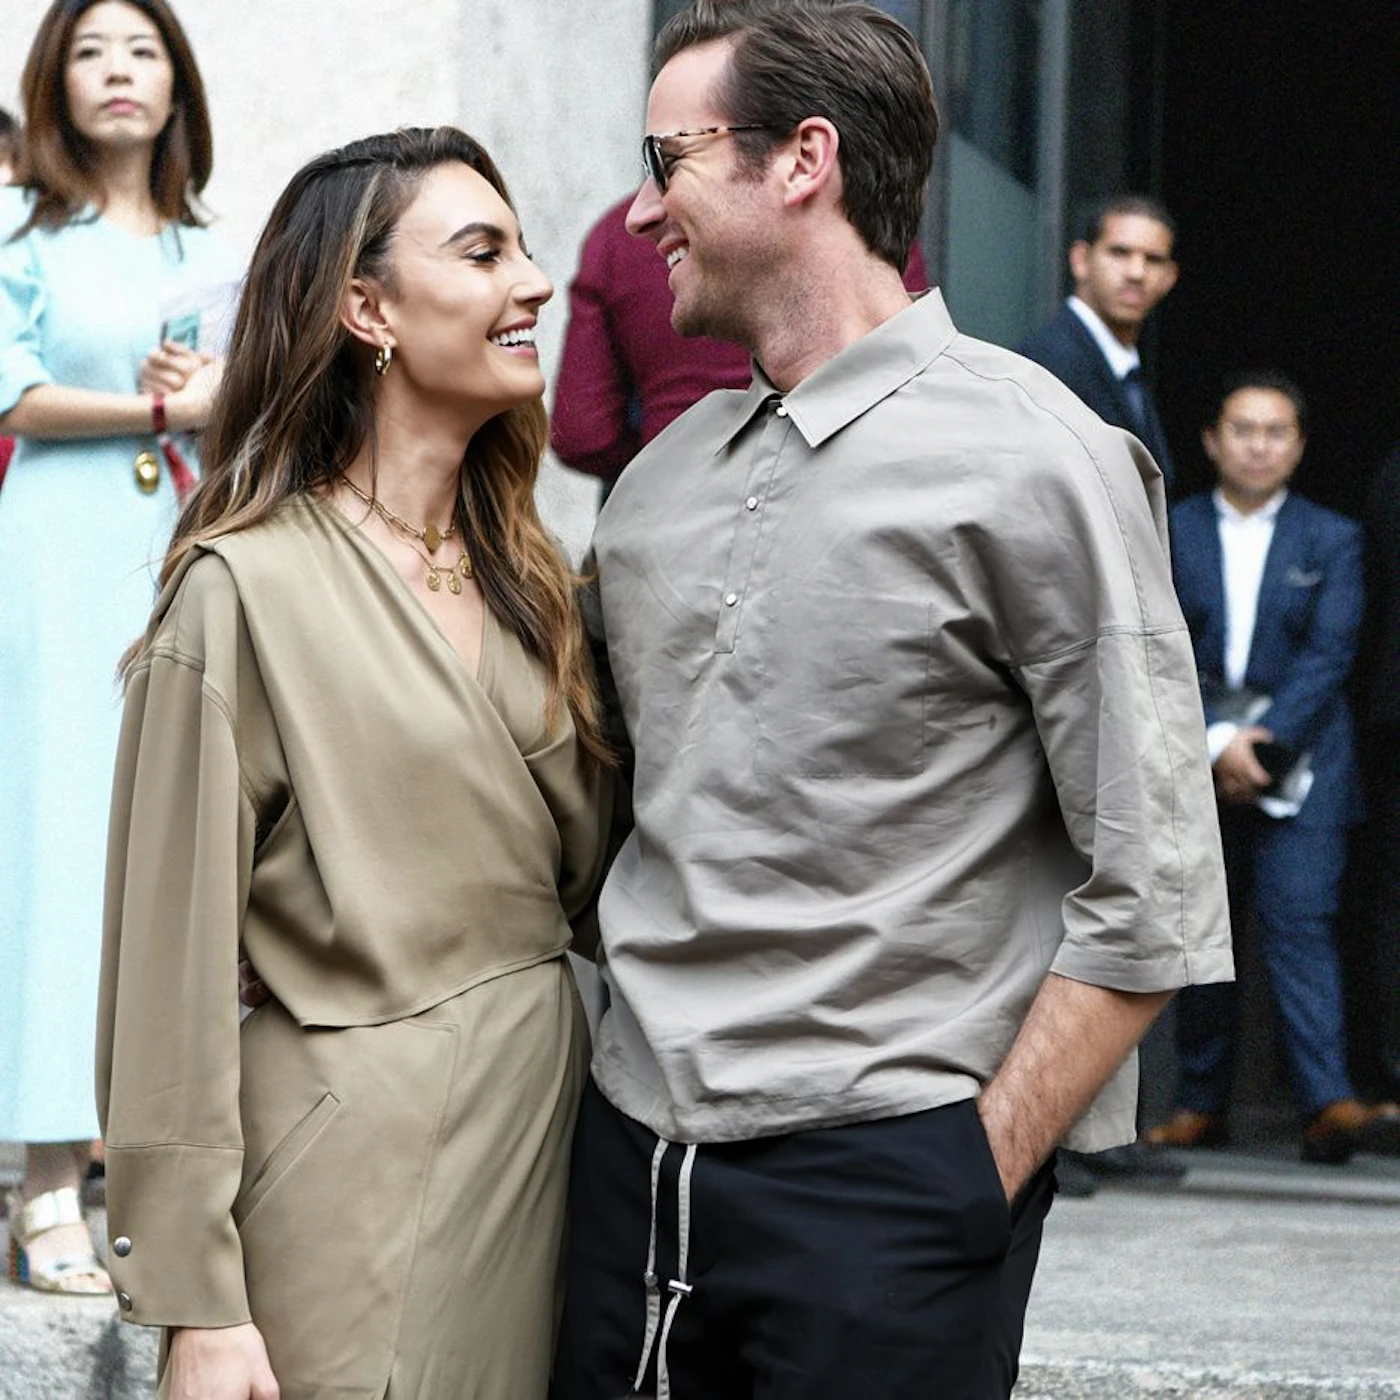 Armie Hammer wants people to refer to him as Elizabeth Chambers’ husband